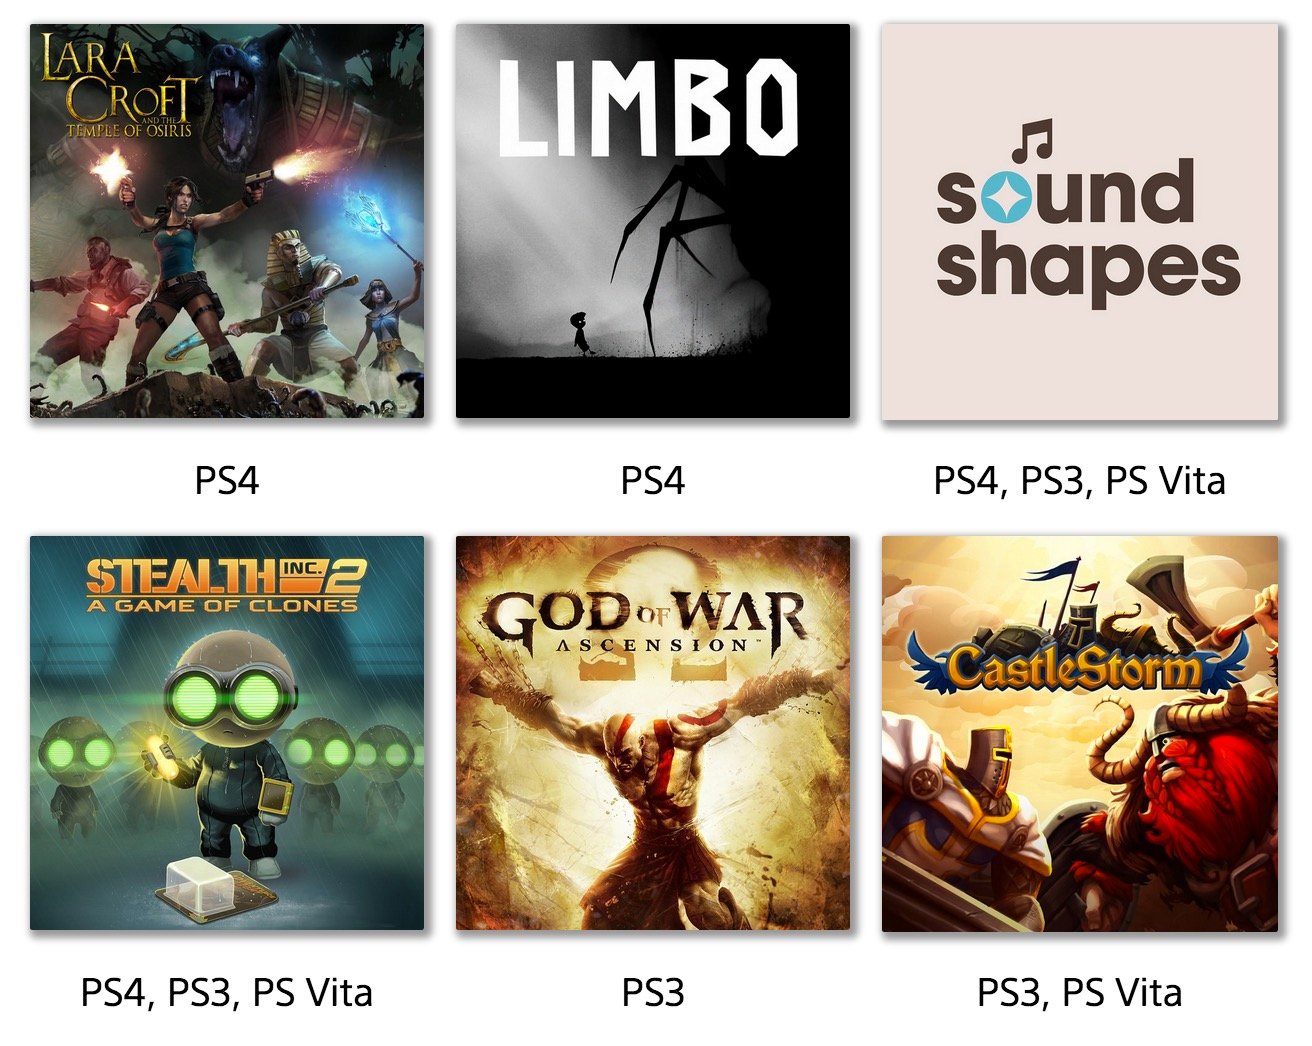 Free PS4 Games Revealed for August